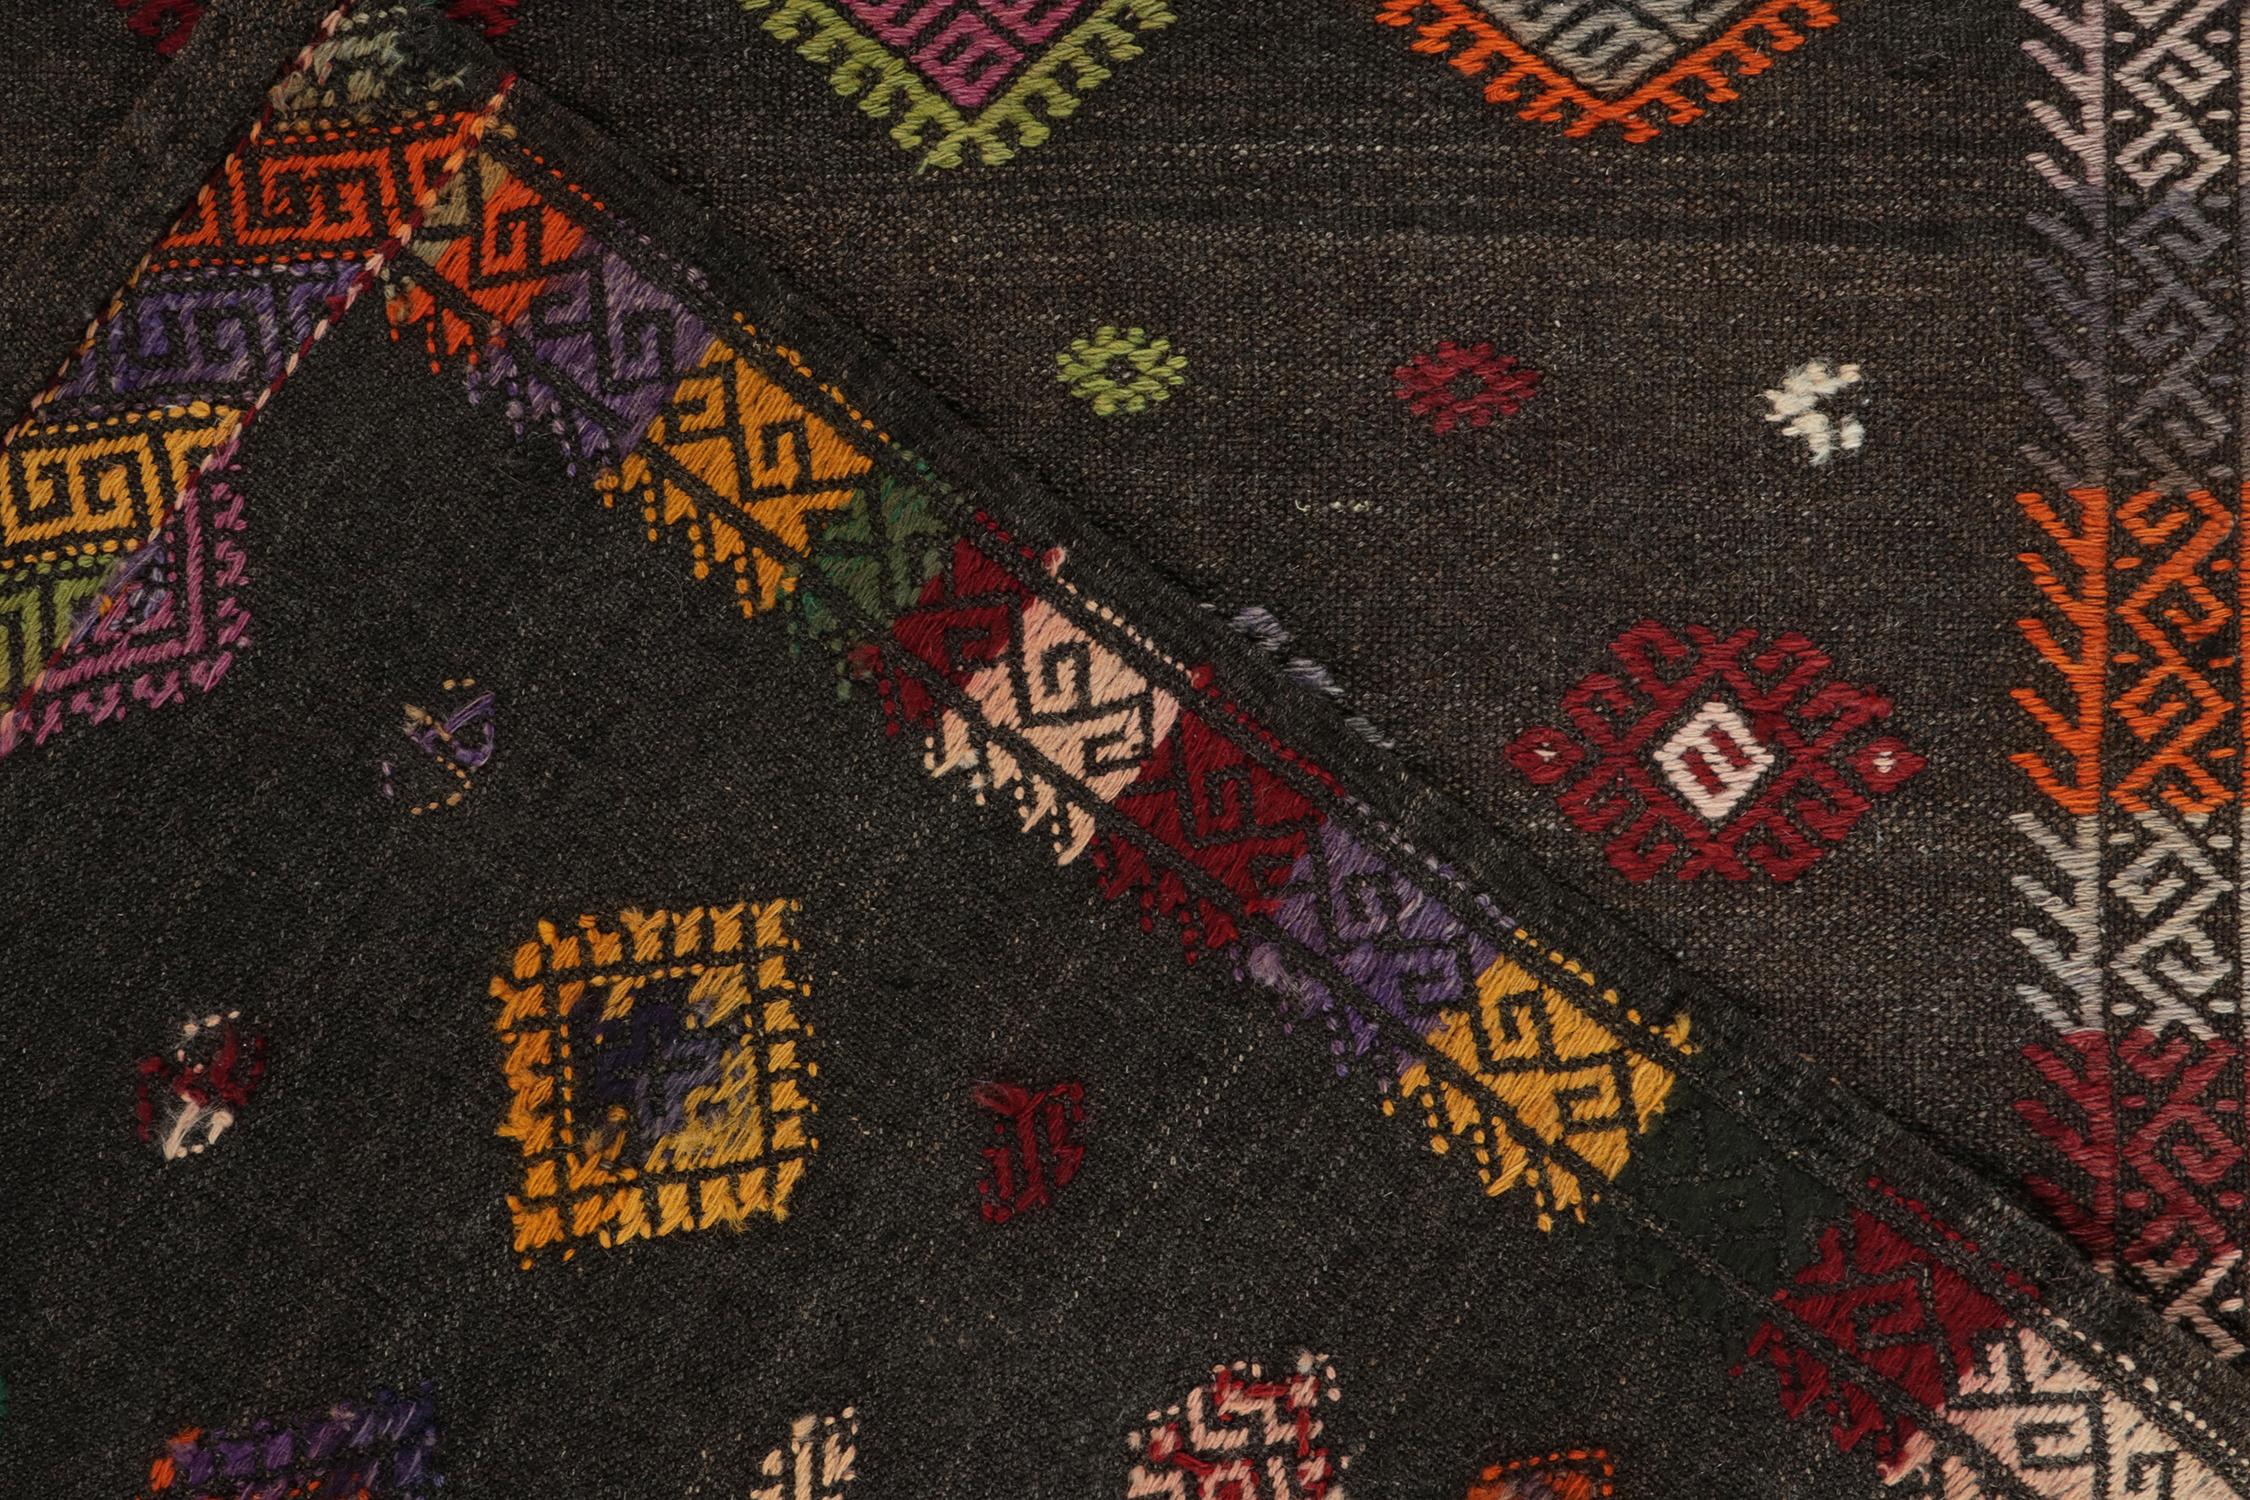 Mid-20th Century 1950s Vintage Kilim Rug in Gray-Brown, Multicolor Geometric Patterns